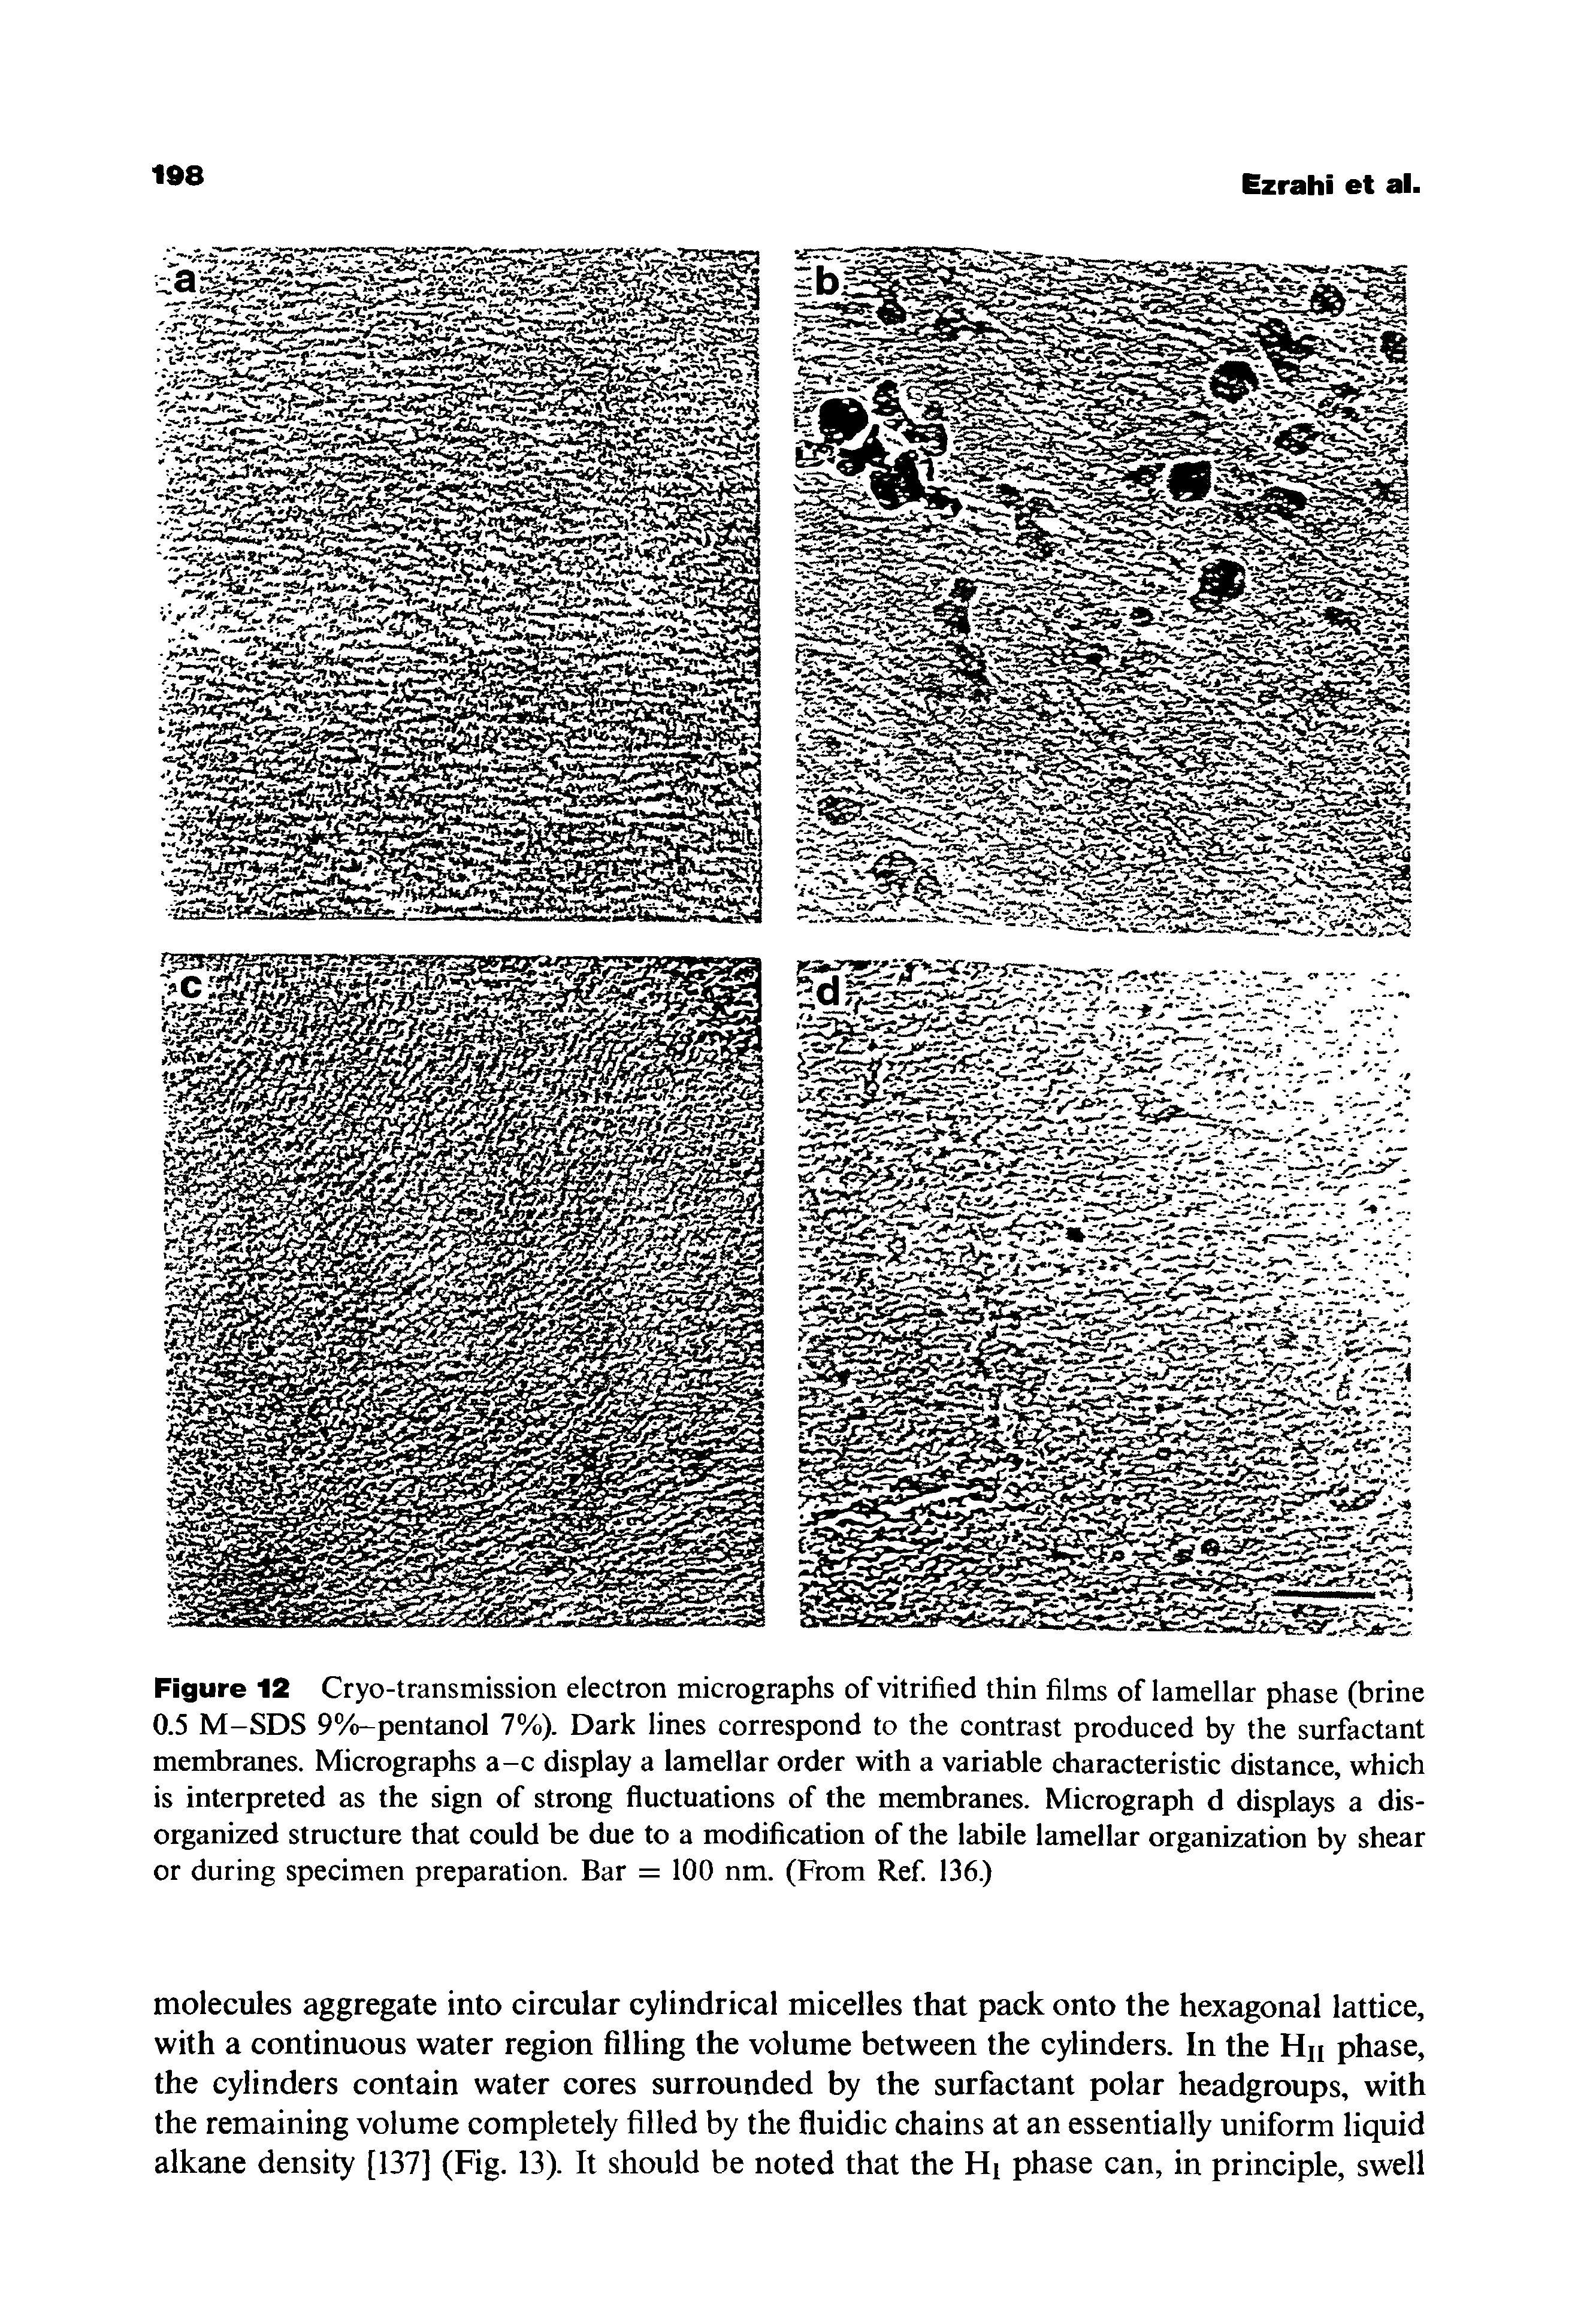 Figure 12 Cryo-transmission electron micrographs of vitrified thin films of lamellar phase (brine 0.5 M-SDS 9%-pentanol 7%). Dark lines correspond to the contrast produced by the surfactant membranes. Micrographs a-c display a lamellar order with a variable characteristic distance, which is interpreted as the sign of strong fluctuations of the membranes. Micrograph d displays a disorganized structure that could be due to a modification of the labile lamellar organization by shear or during specimen preparation. Bar = 100 nm. (From Ref. 136.)...